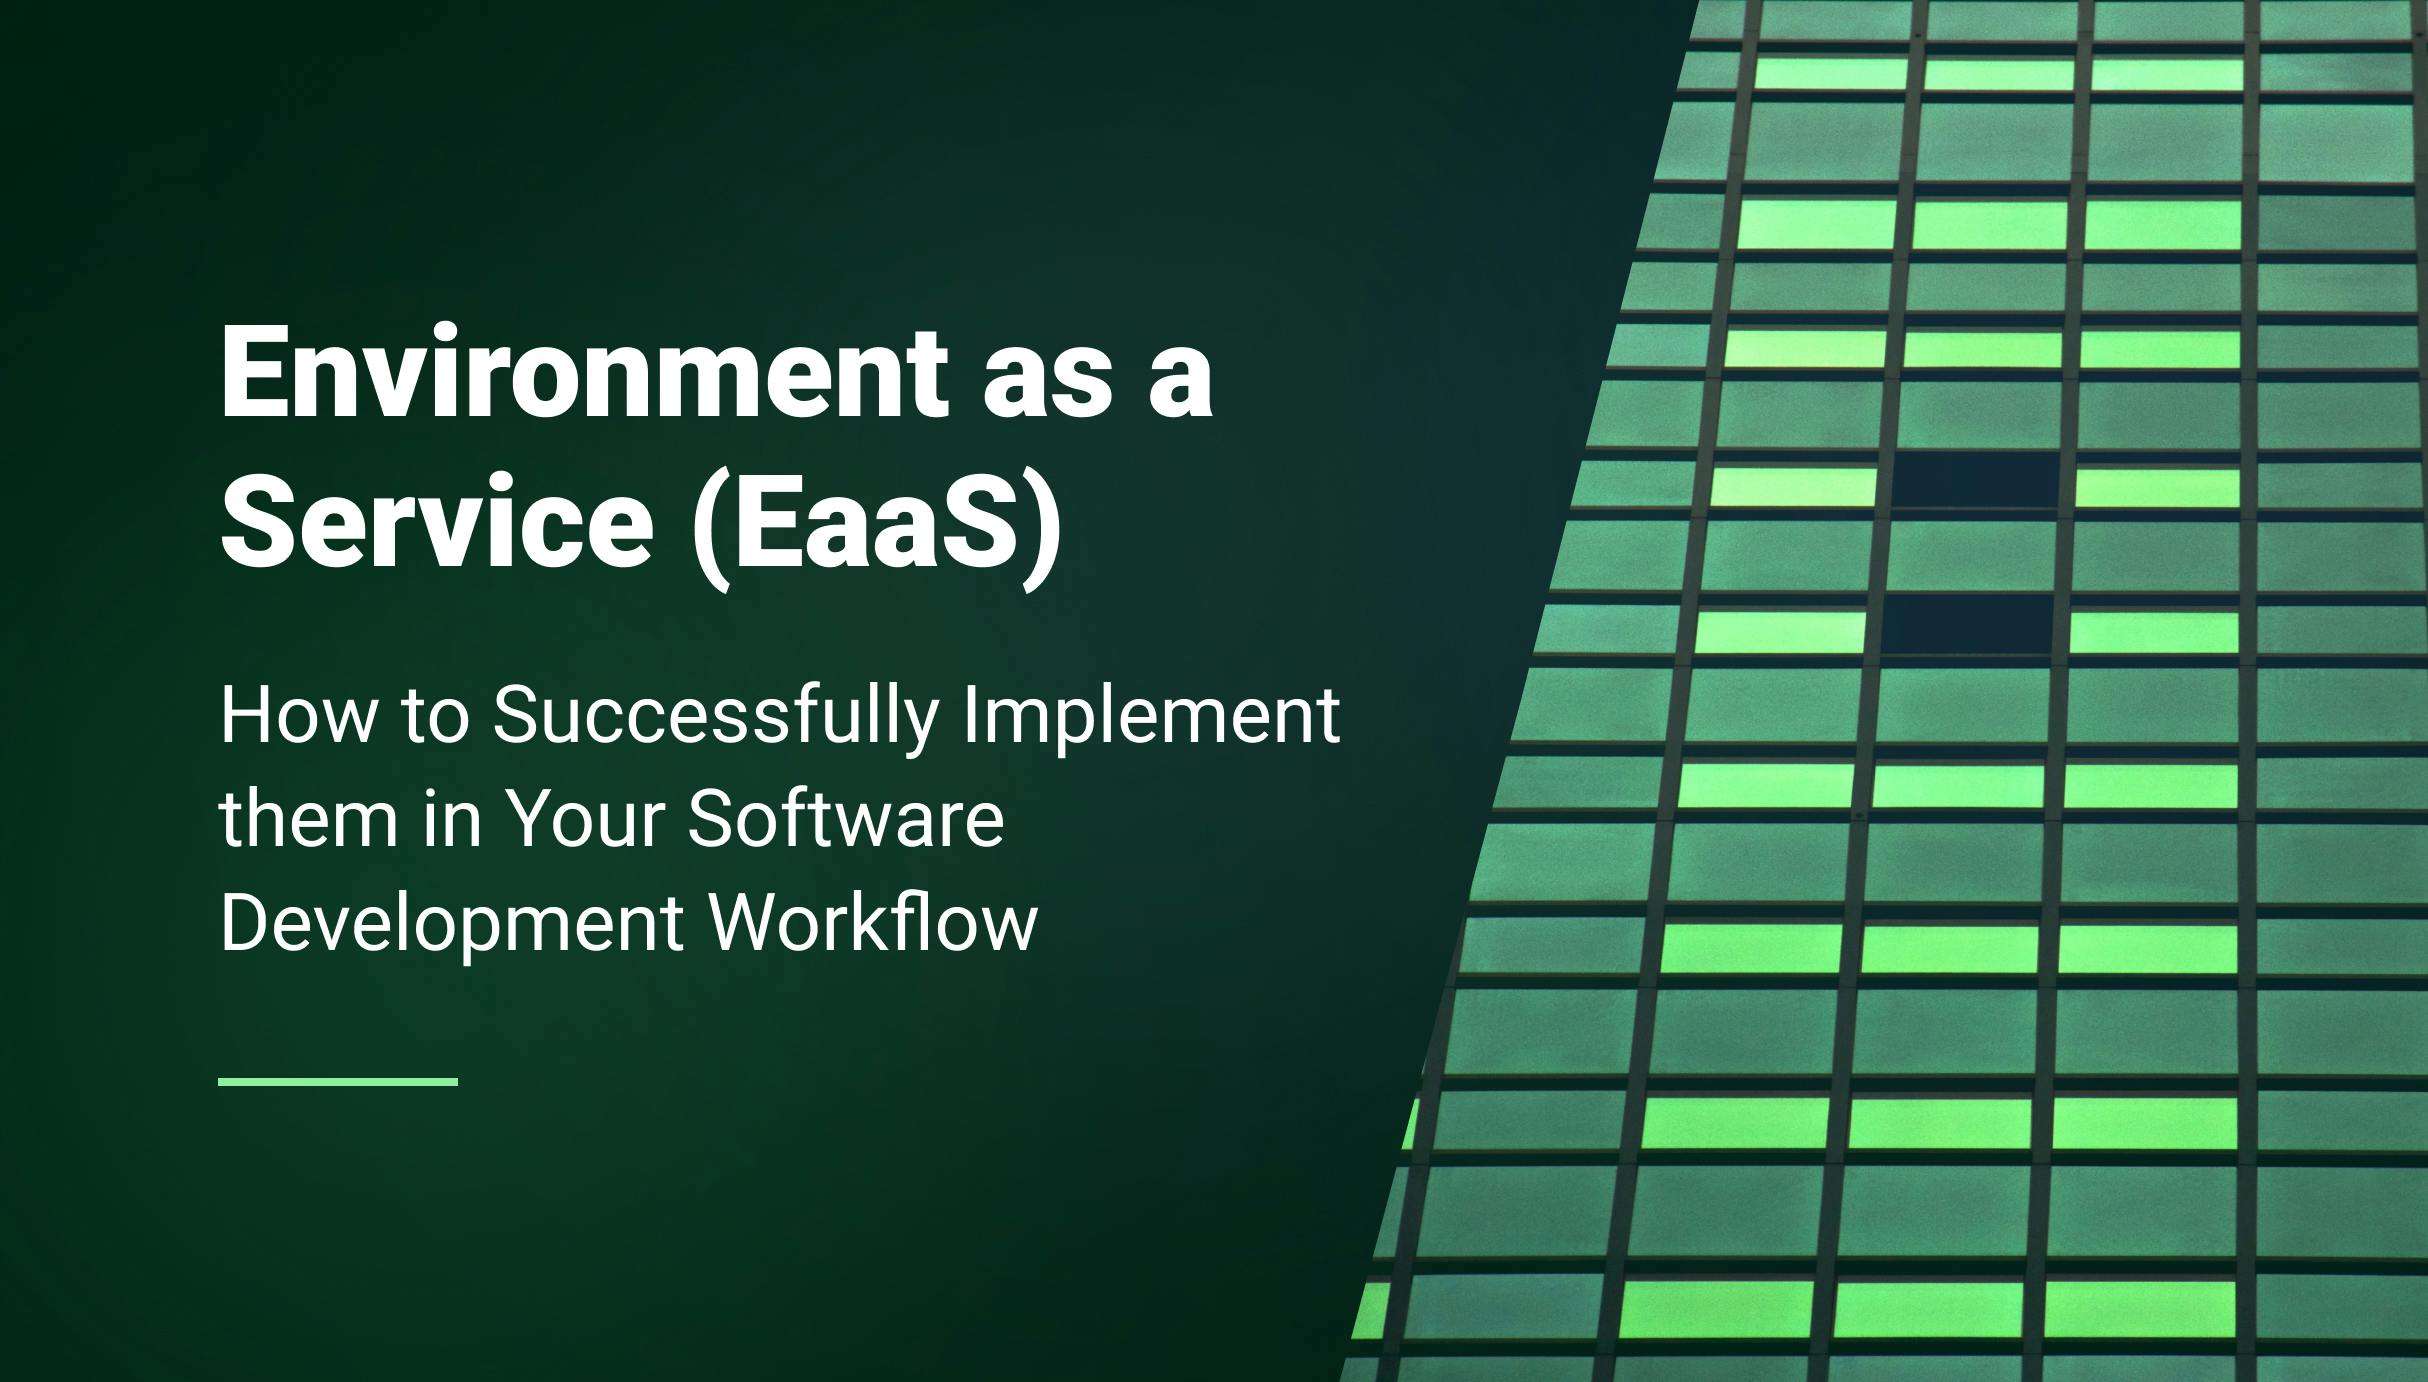 How to Successfully Implement an Environment as a Service (EaaS) Solution in Your Software Development Workflow - Qovery